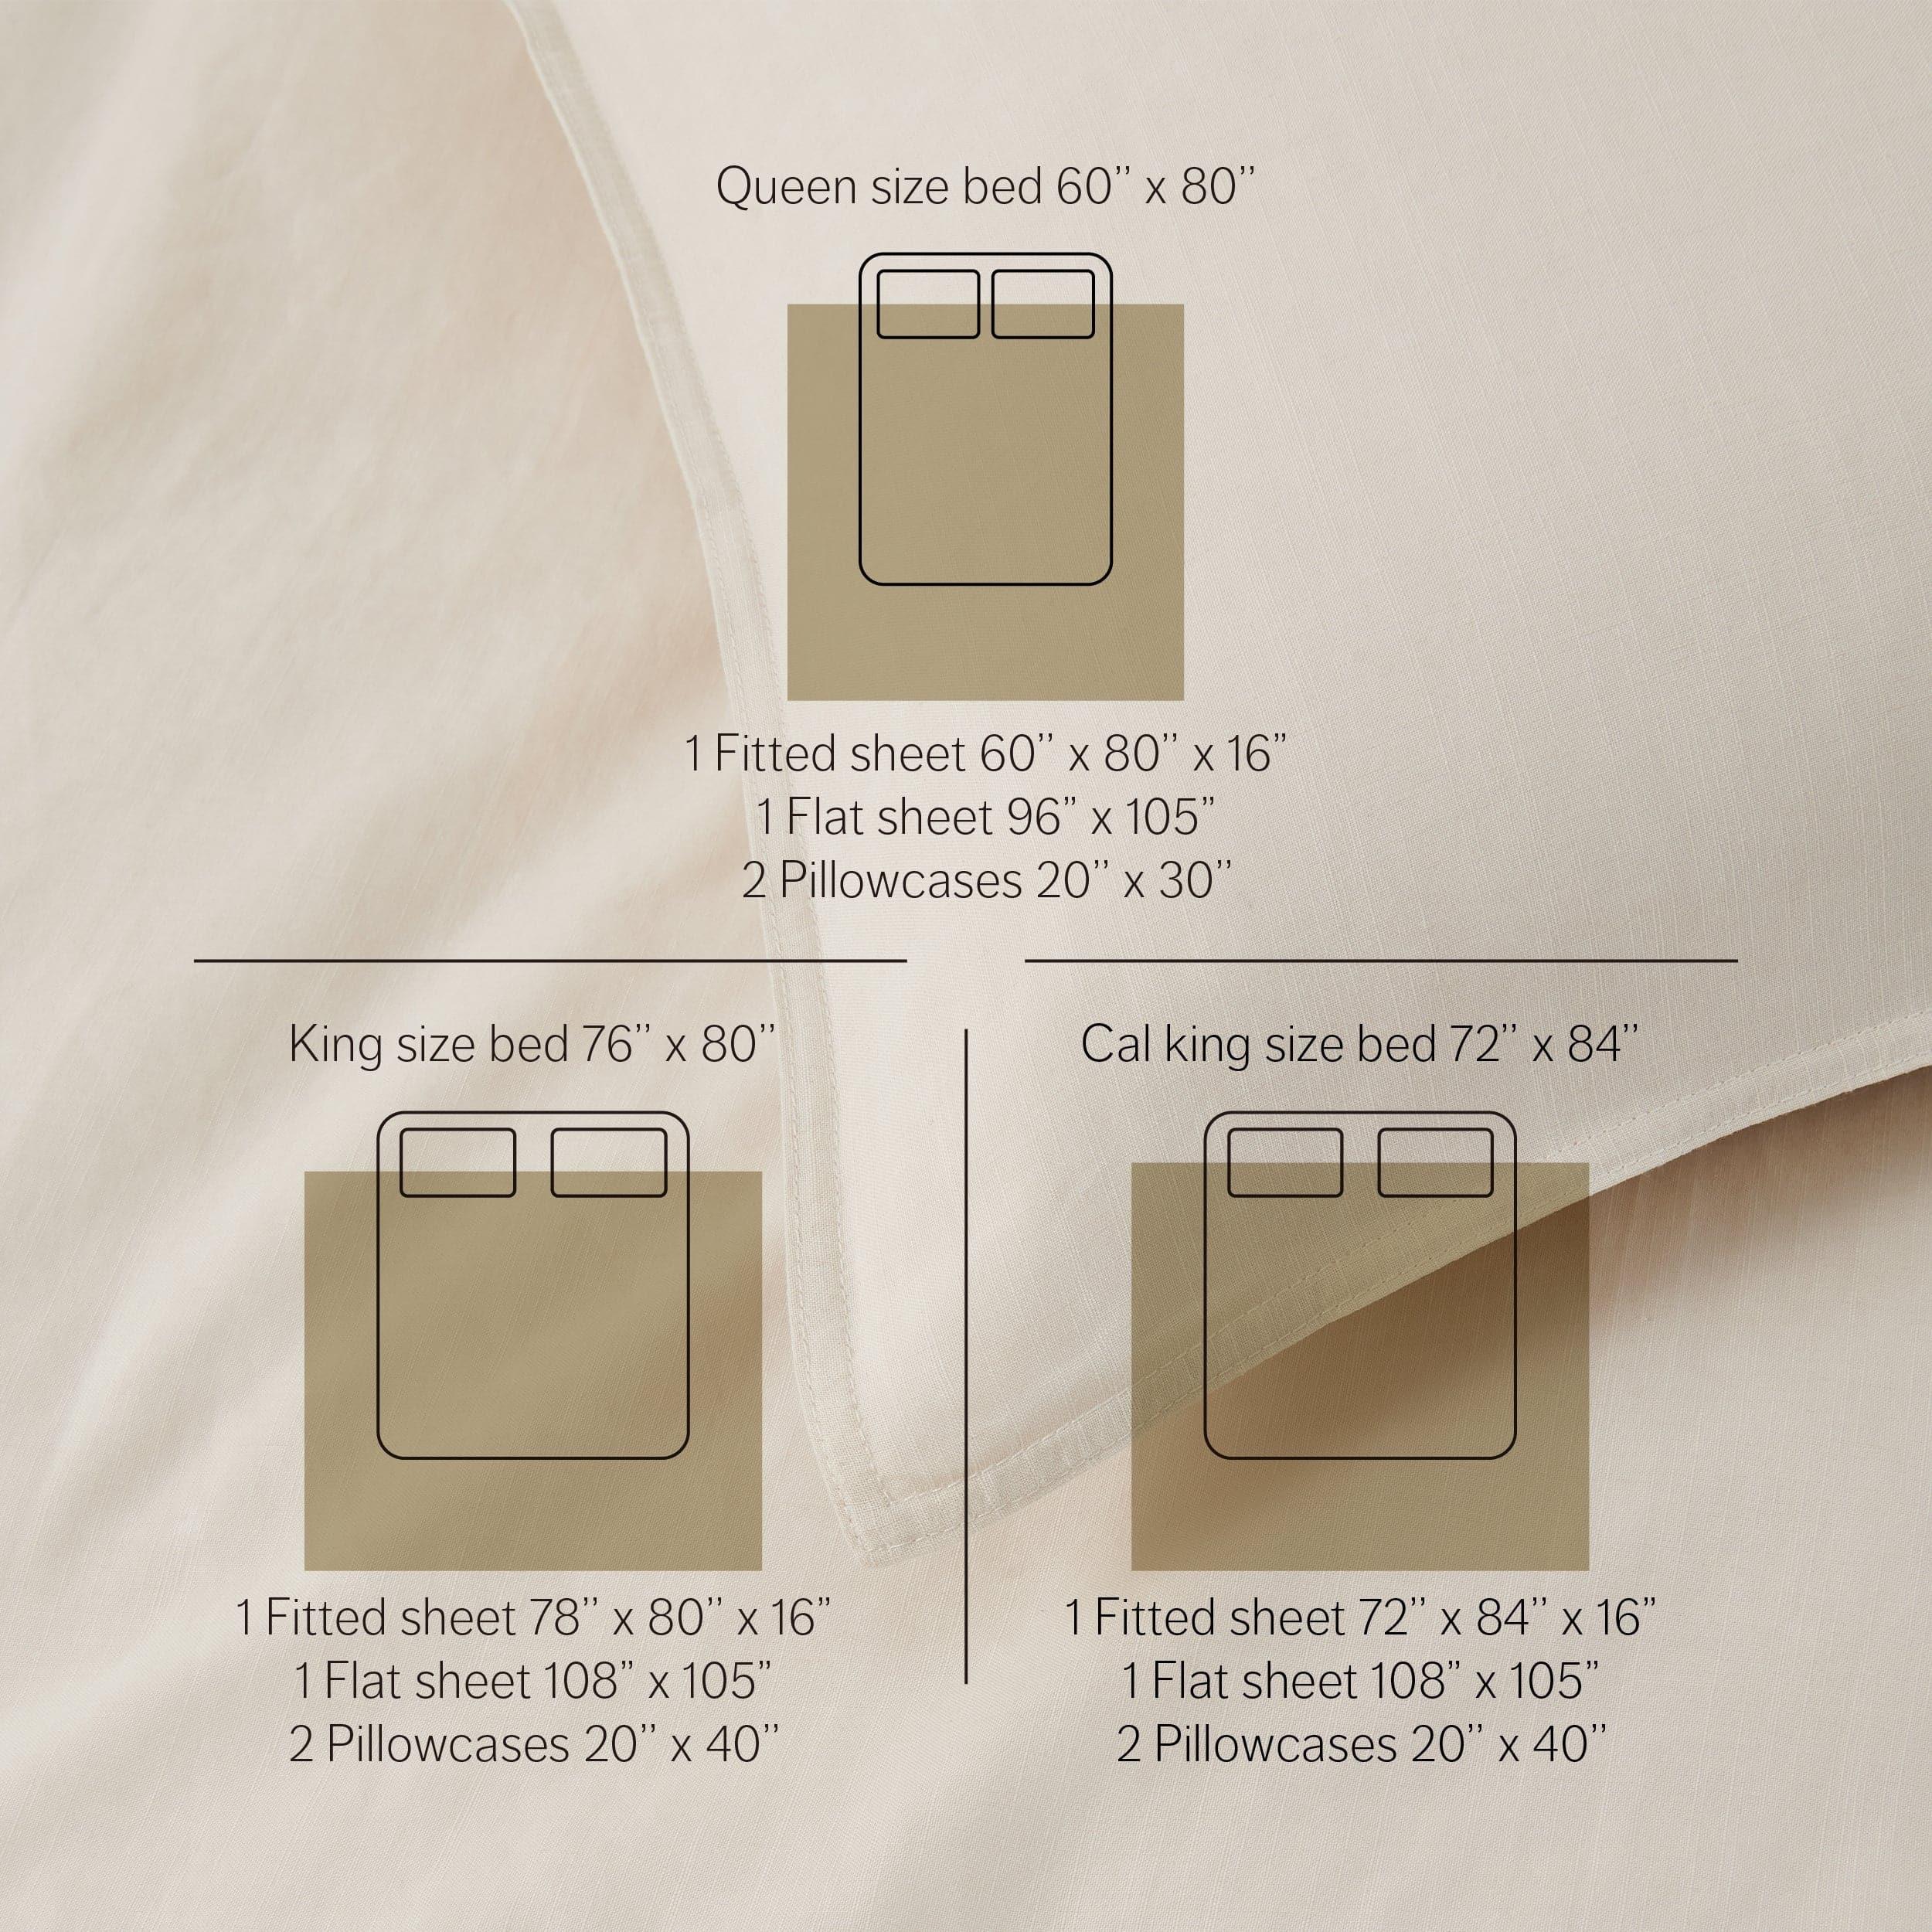 Rest peacefully with a high-quality queen size sheet set for ultimate comfort.